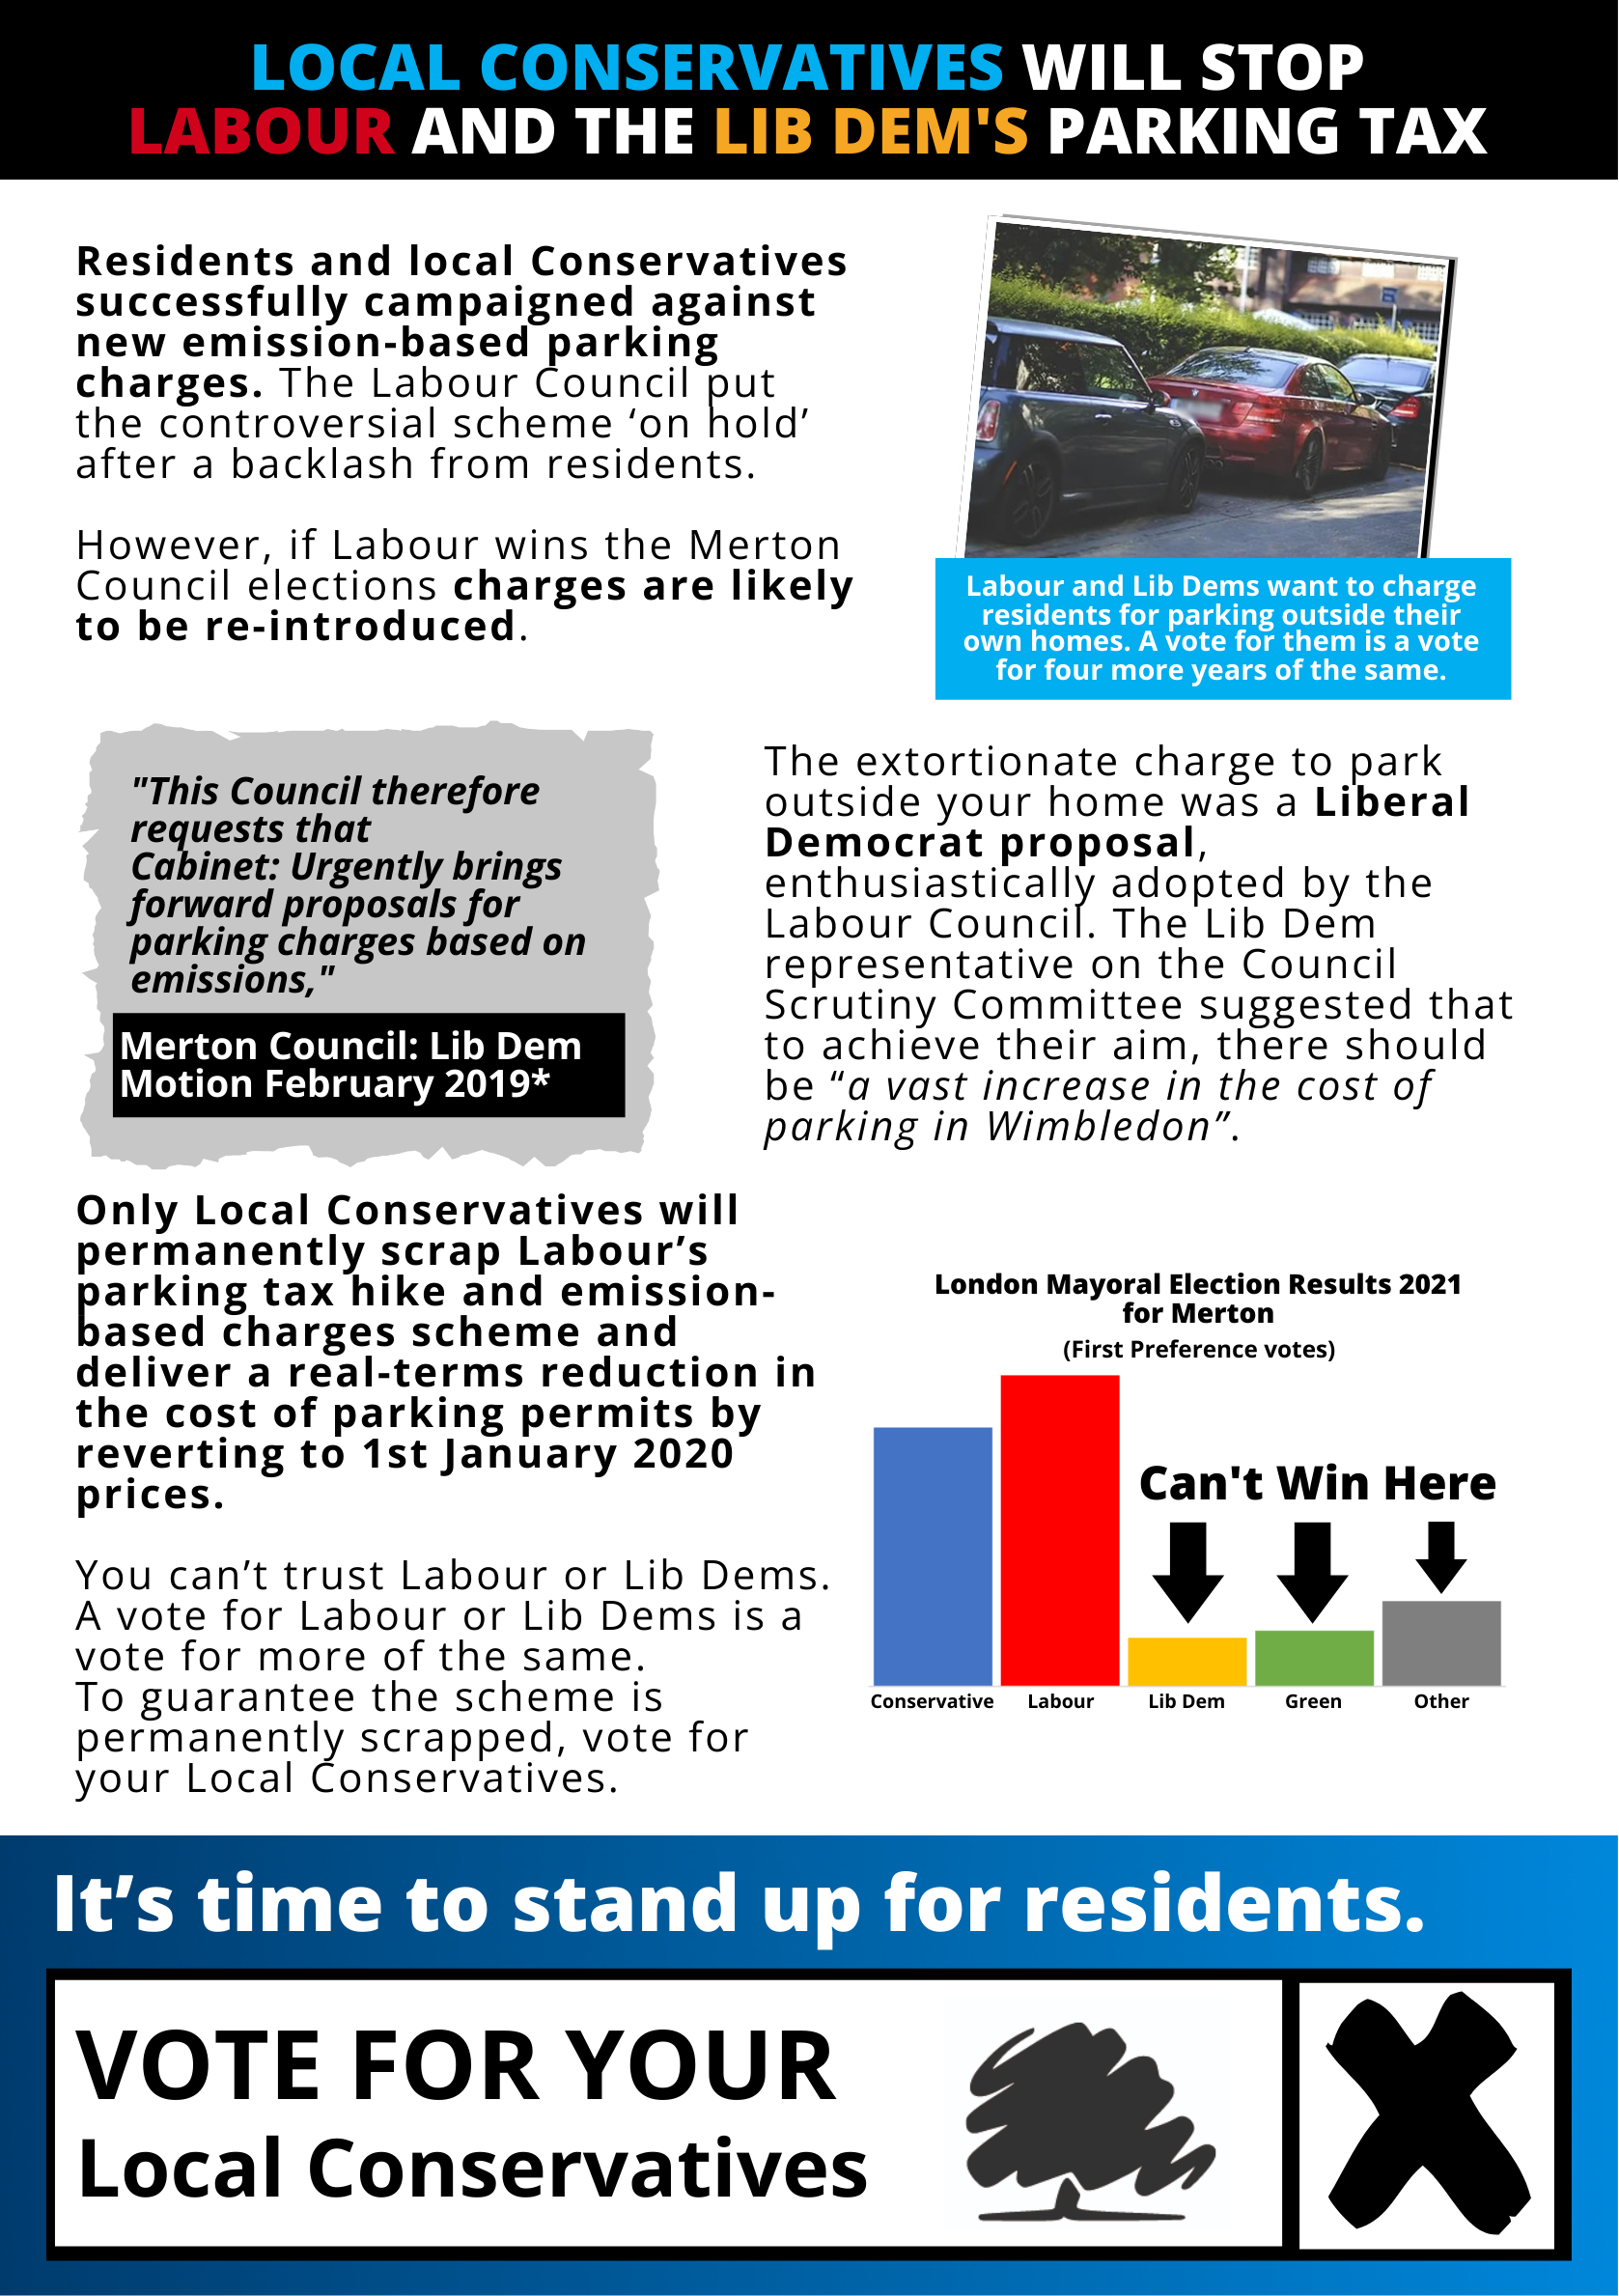 information on Labour and the Lib Dems Parking Tax Hike